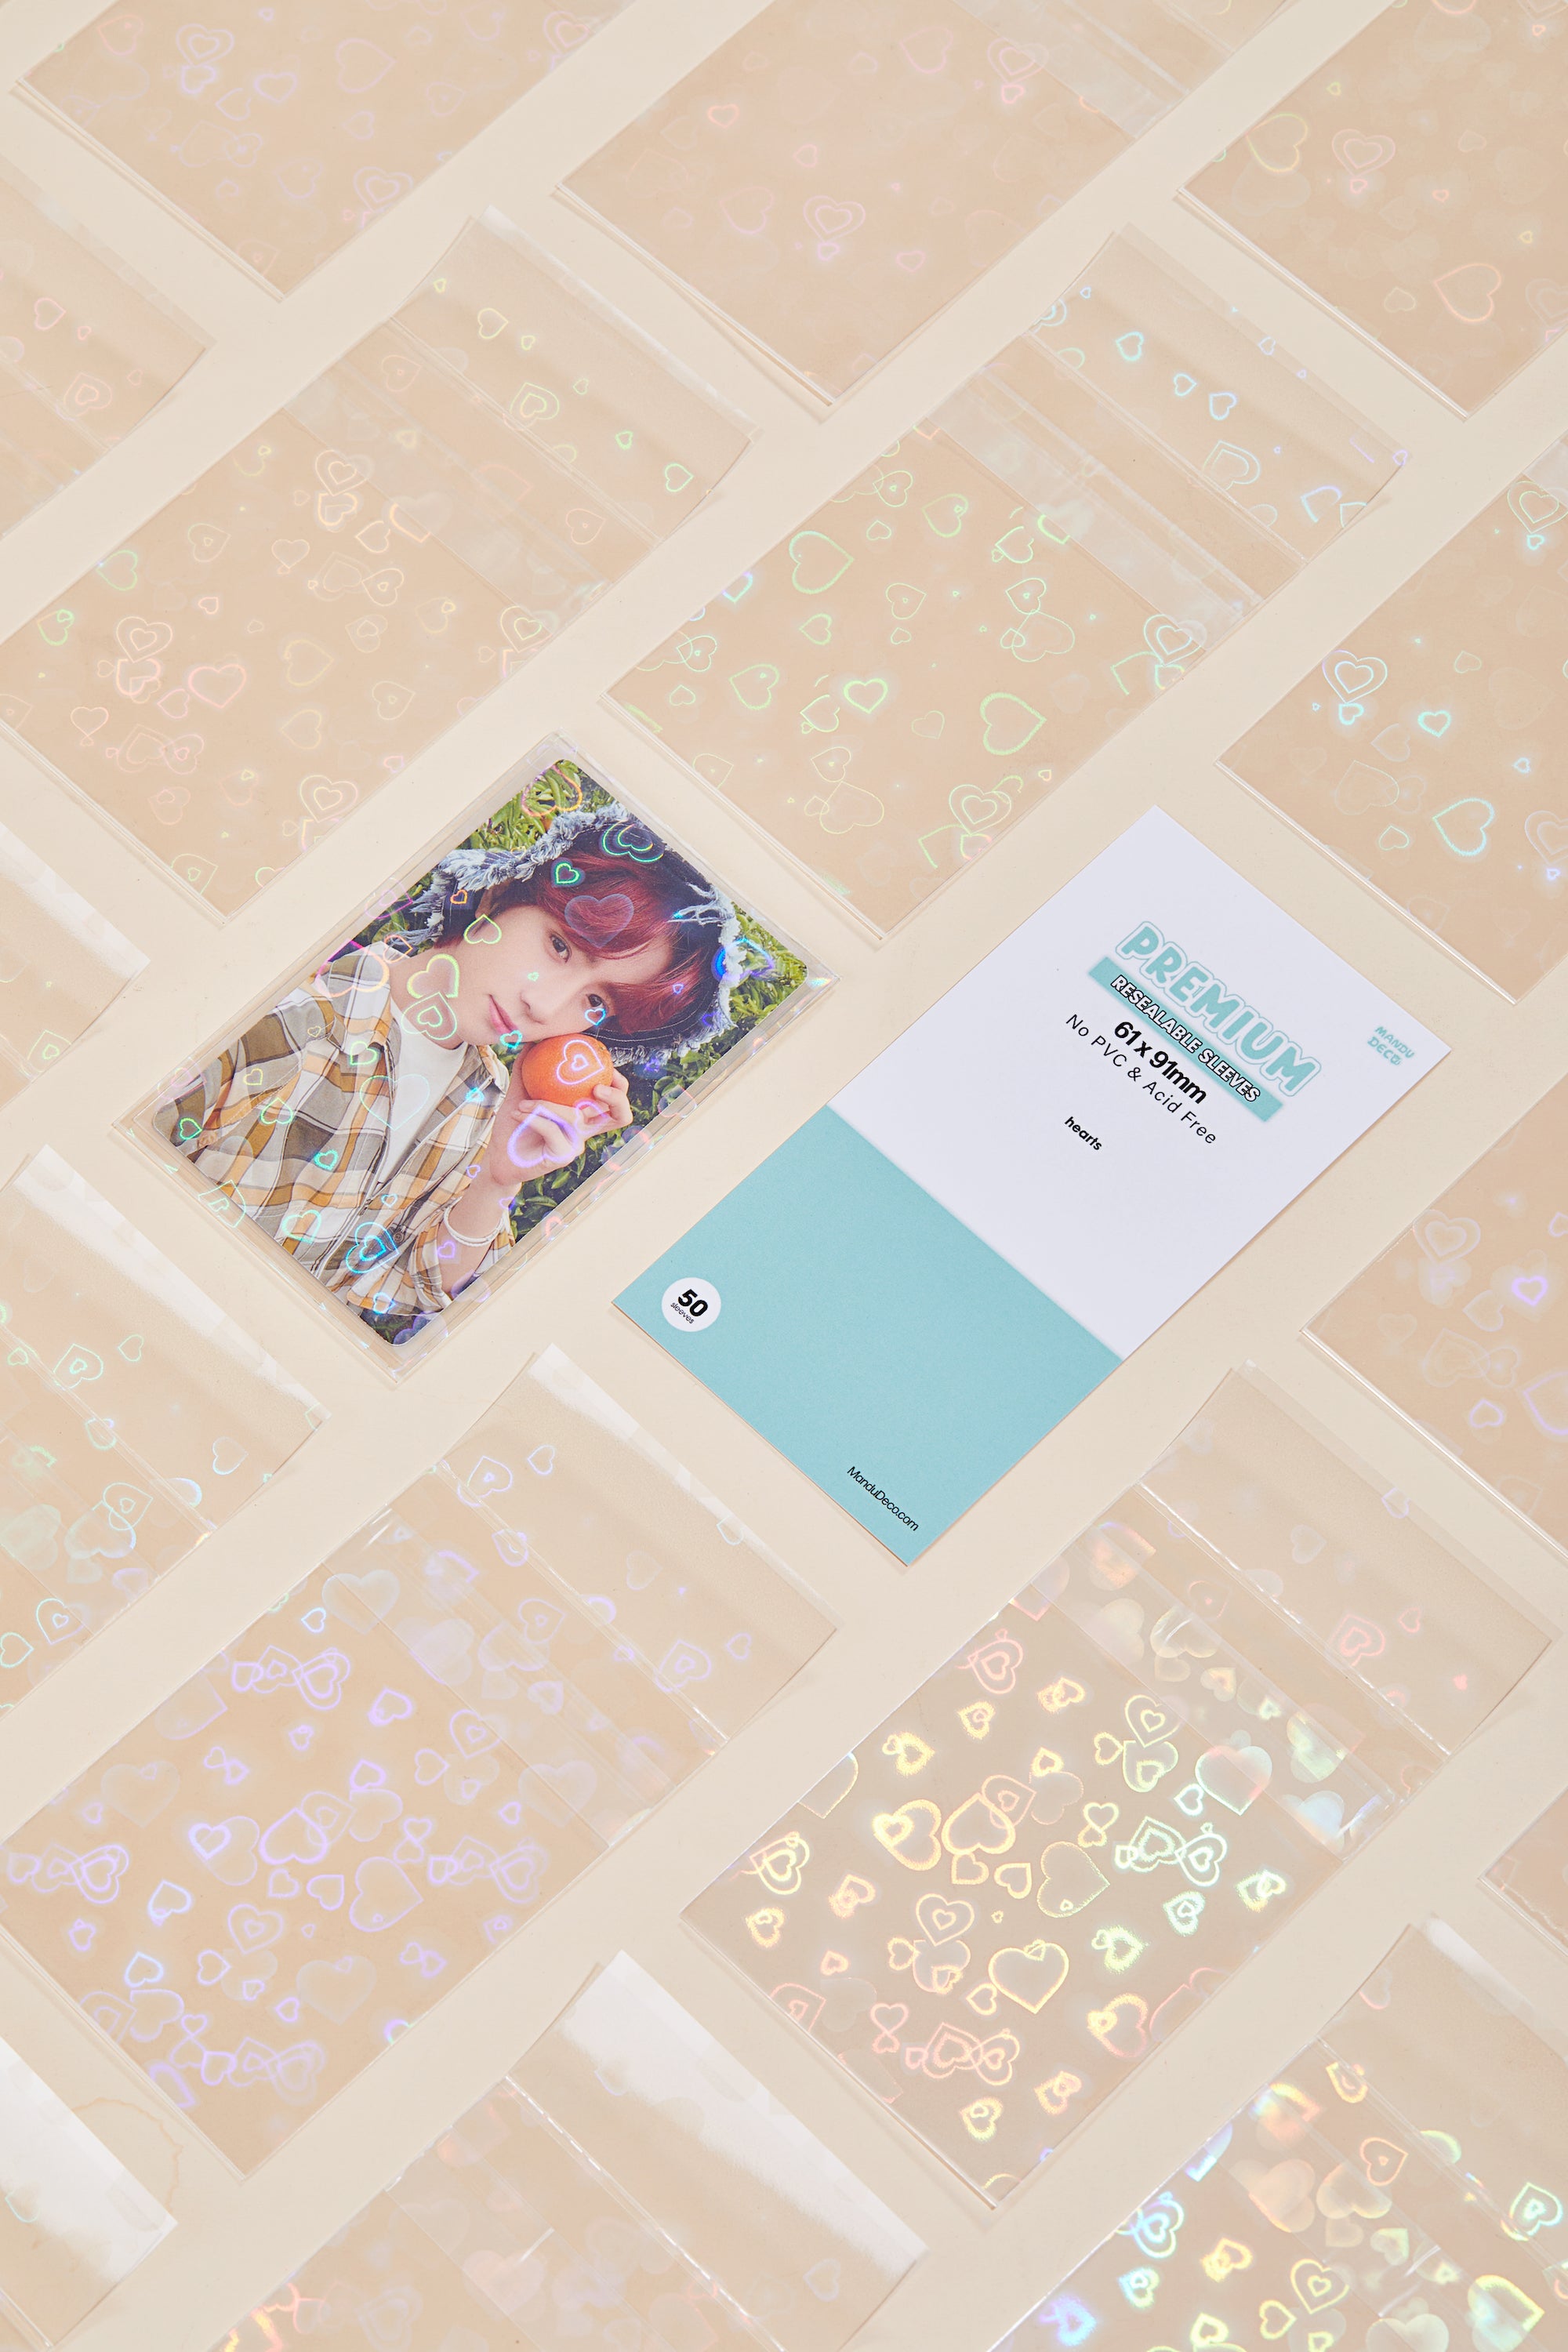 PREMIUM RESEALABLE PHOTOCARD SLEEVES - HEART VERSION (61x91MM)